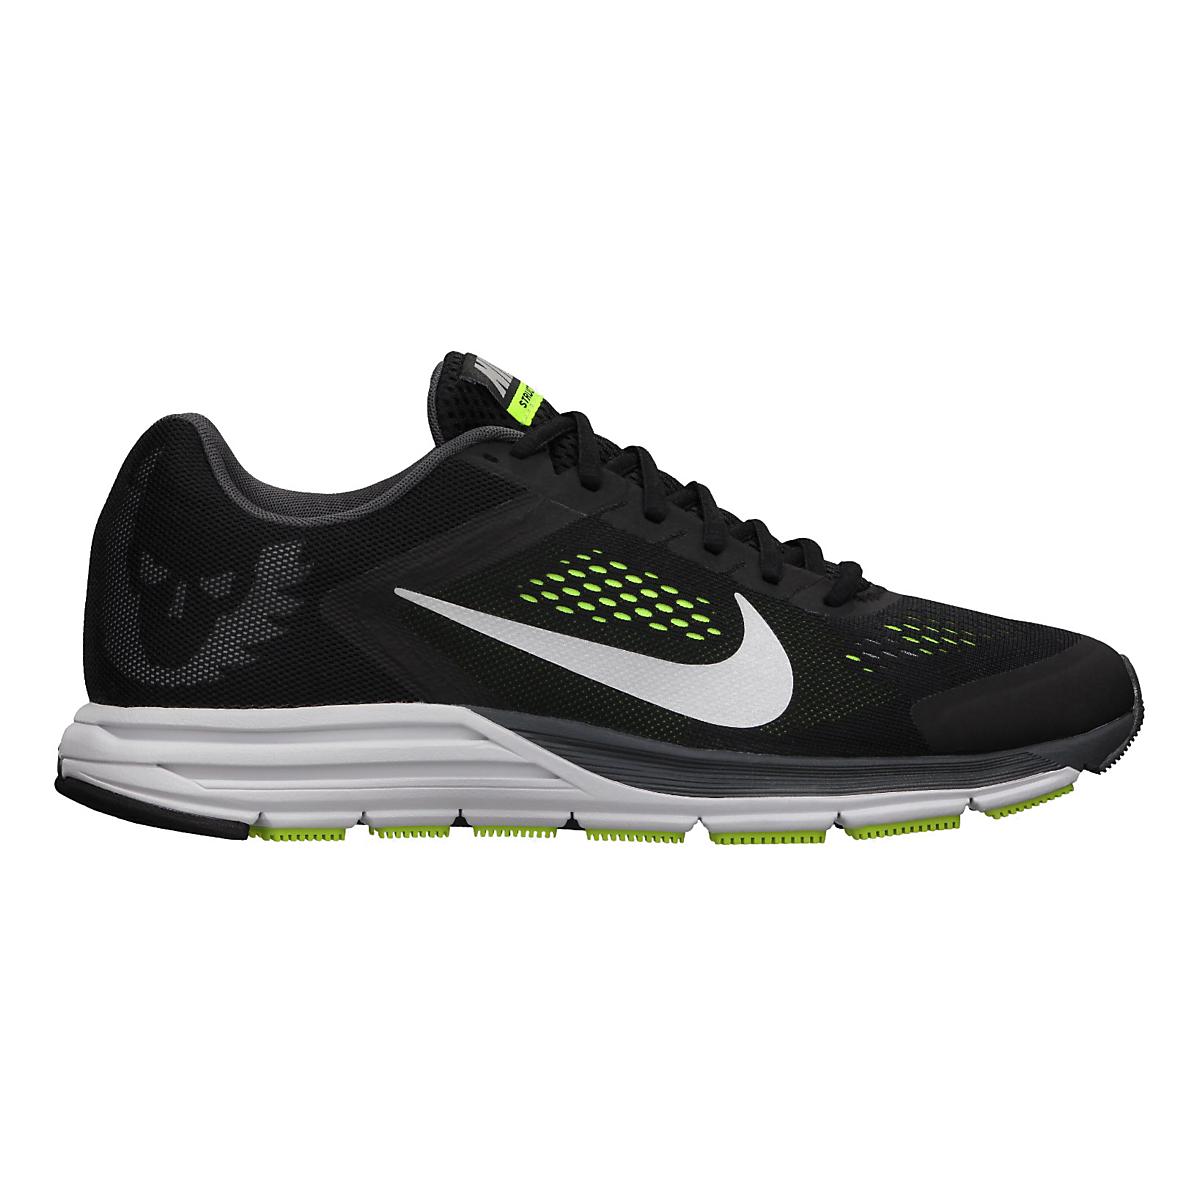 Womens Nike Zoom Structure+ 17 Oregon Project Running Shoe at Road